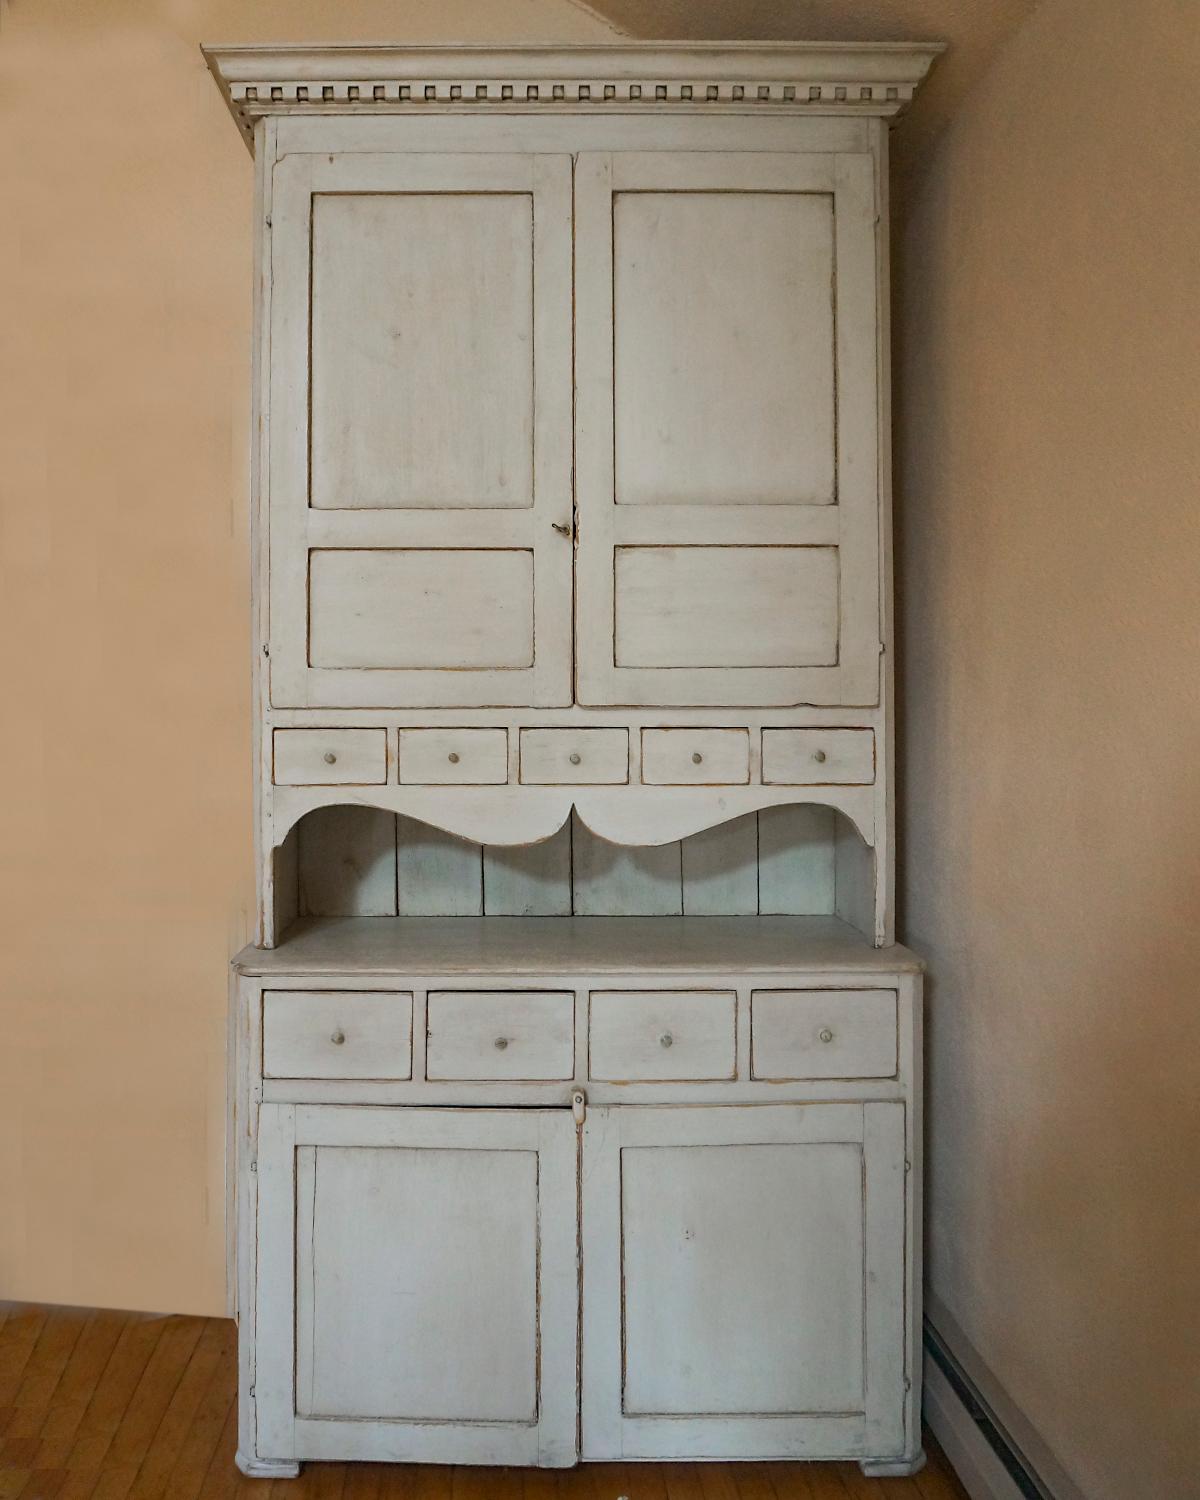 Two part cabinet or hutch, Sweden circa 1820, with serving space. The upper section has a straight cornice with dental detail over a pair of paneled doors and row of small drawers. The interior has two fixed shelves. Paneled back and nicely curved